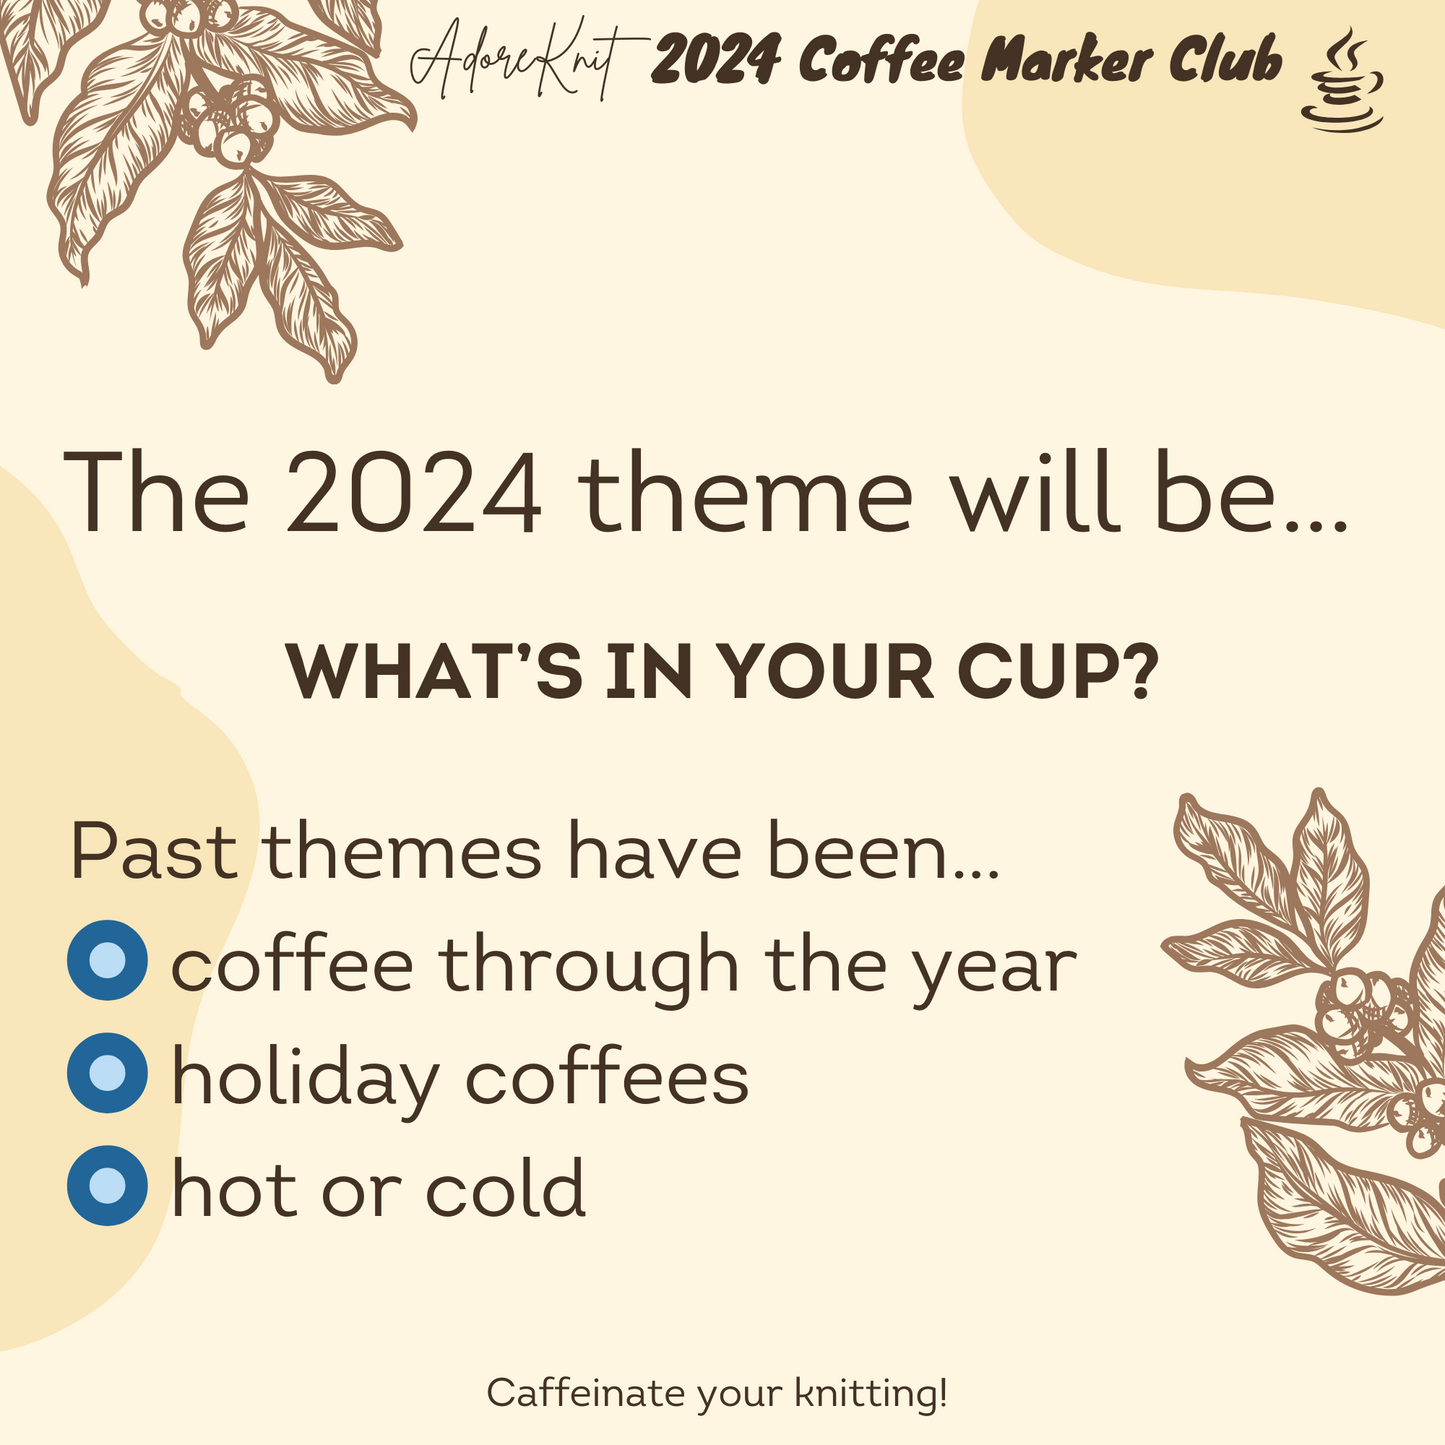 2024 Coffee Countdown Club, 12 Days of Progress & Stitch Markers with a Project Bag - AdoreKnit